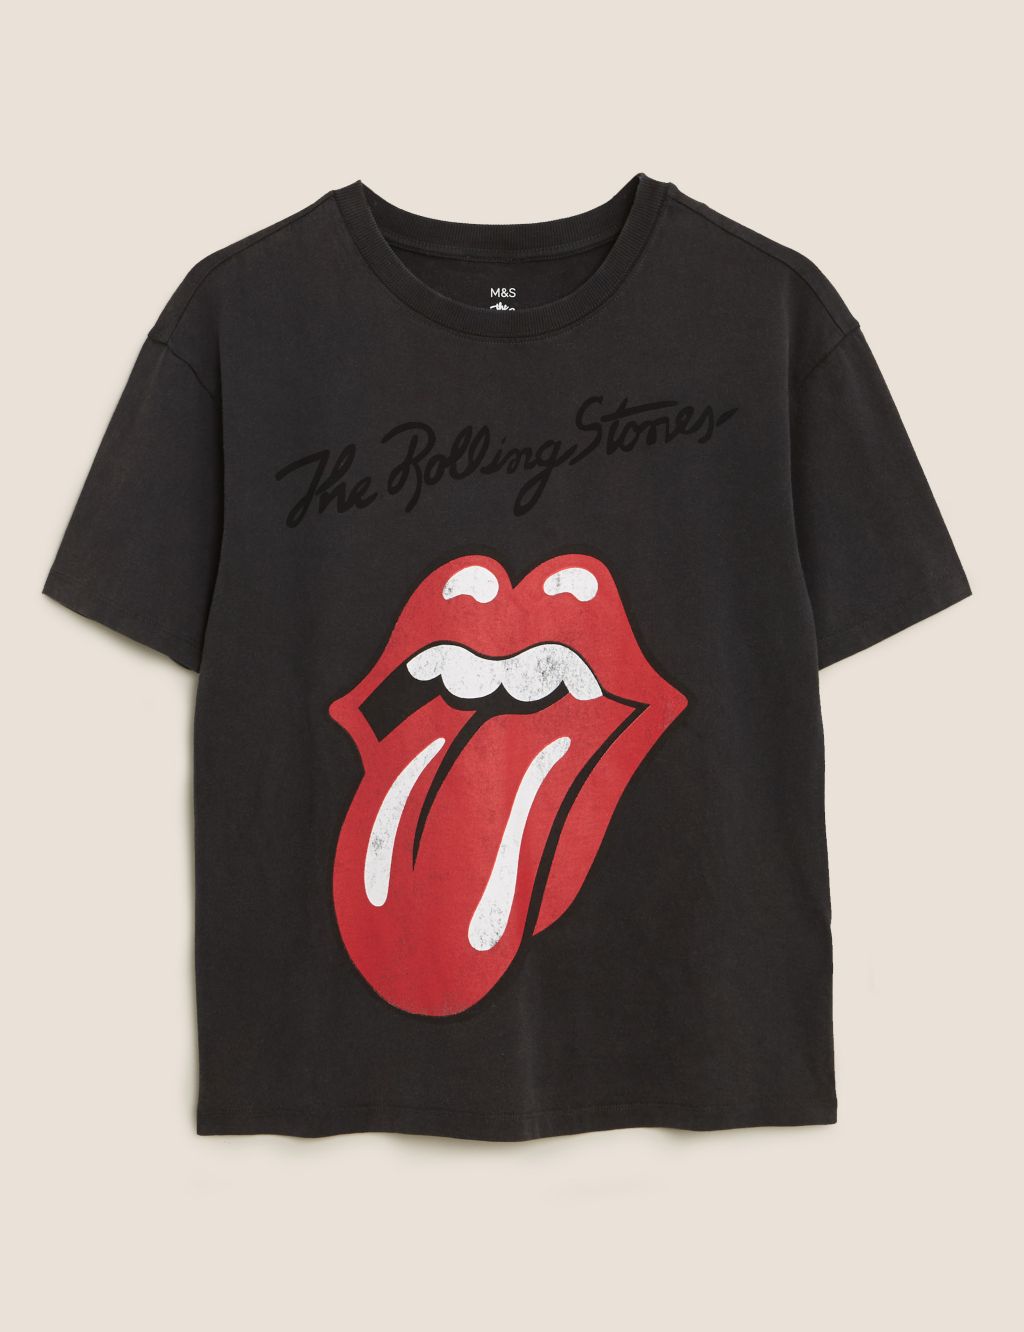 Pure Cotton The Rolling Stones T-Shirt | M&S Collection | M&S